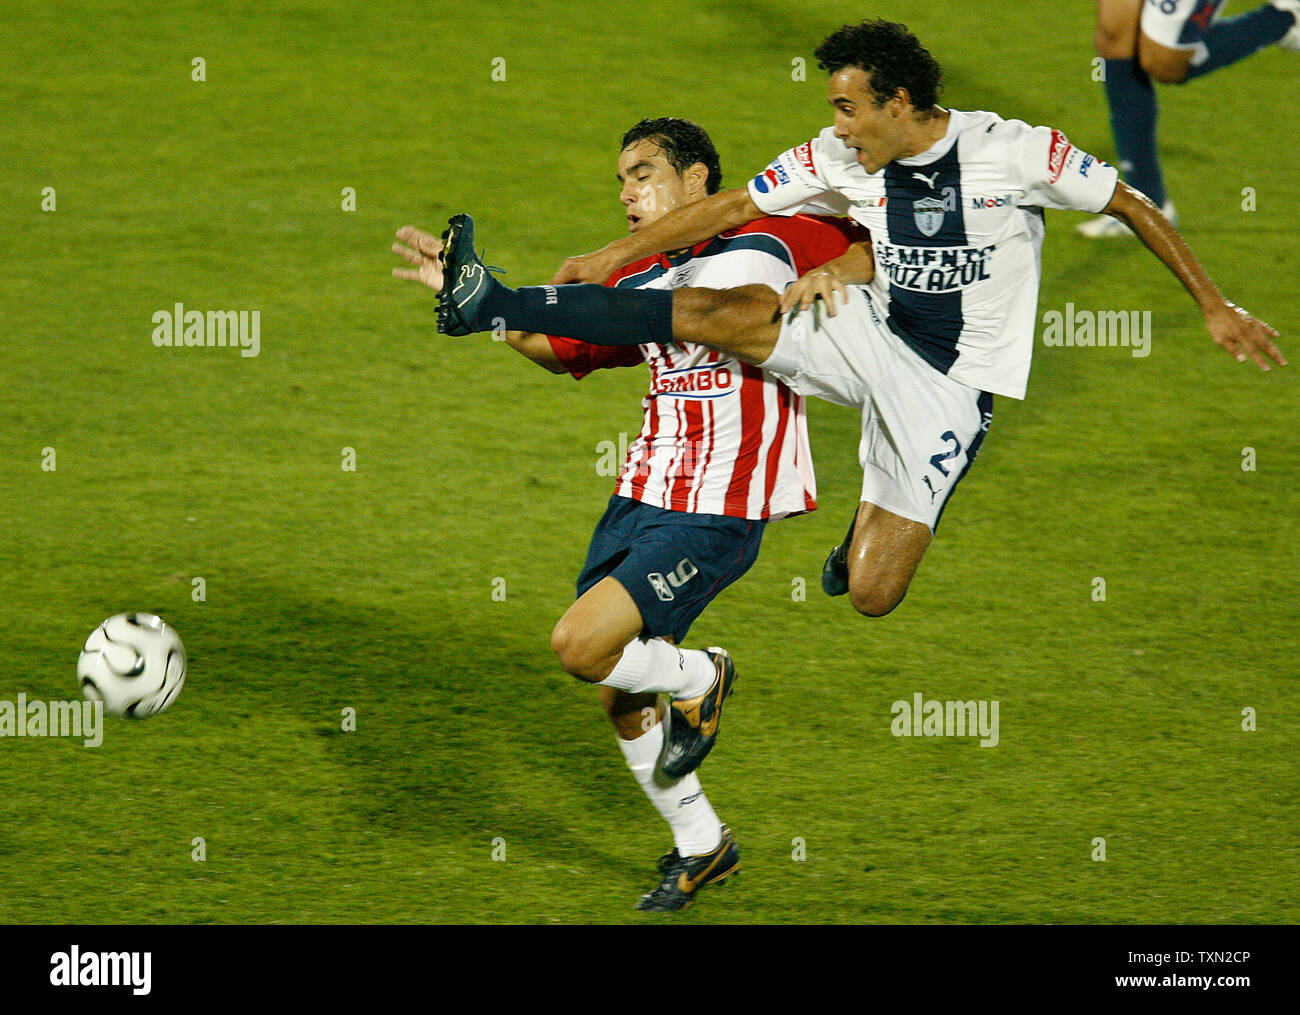 CF Pachuca defender Leobardo Lopez leaps to stop a rush by CD Guadalajara forward Omar Bravo in the second half at Dick's Sporting Goods Park in Commerce City, Colorado on July 31, 2007. Pachuca defeated Guadalajara 1-0 to advance to the semifinals of the 2007 SuperLiga.   (UPI Photo/Gary C. Caskey) Stock Photo